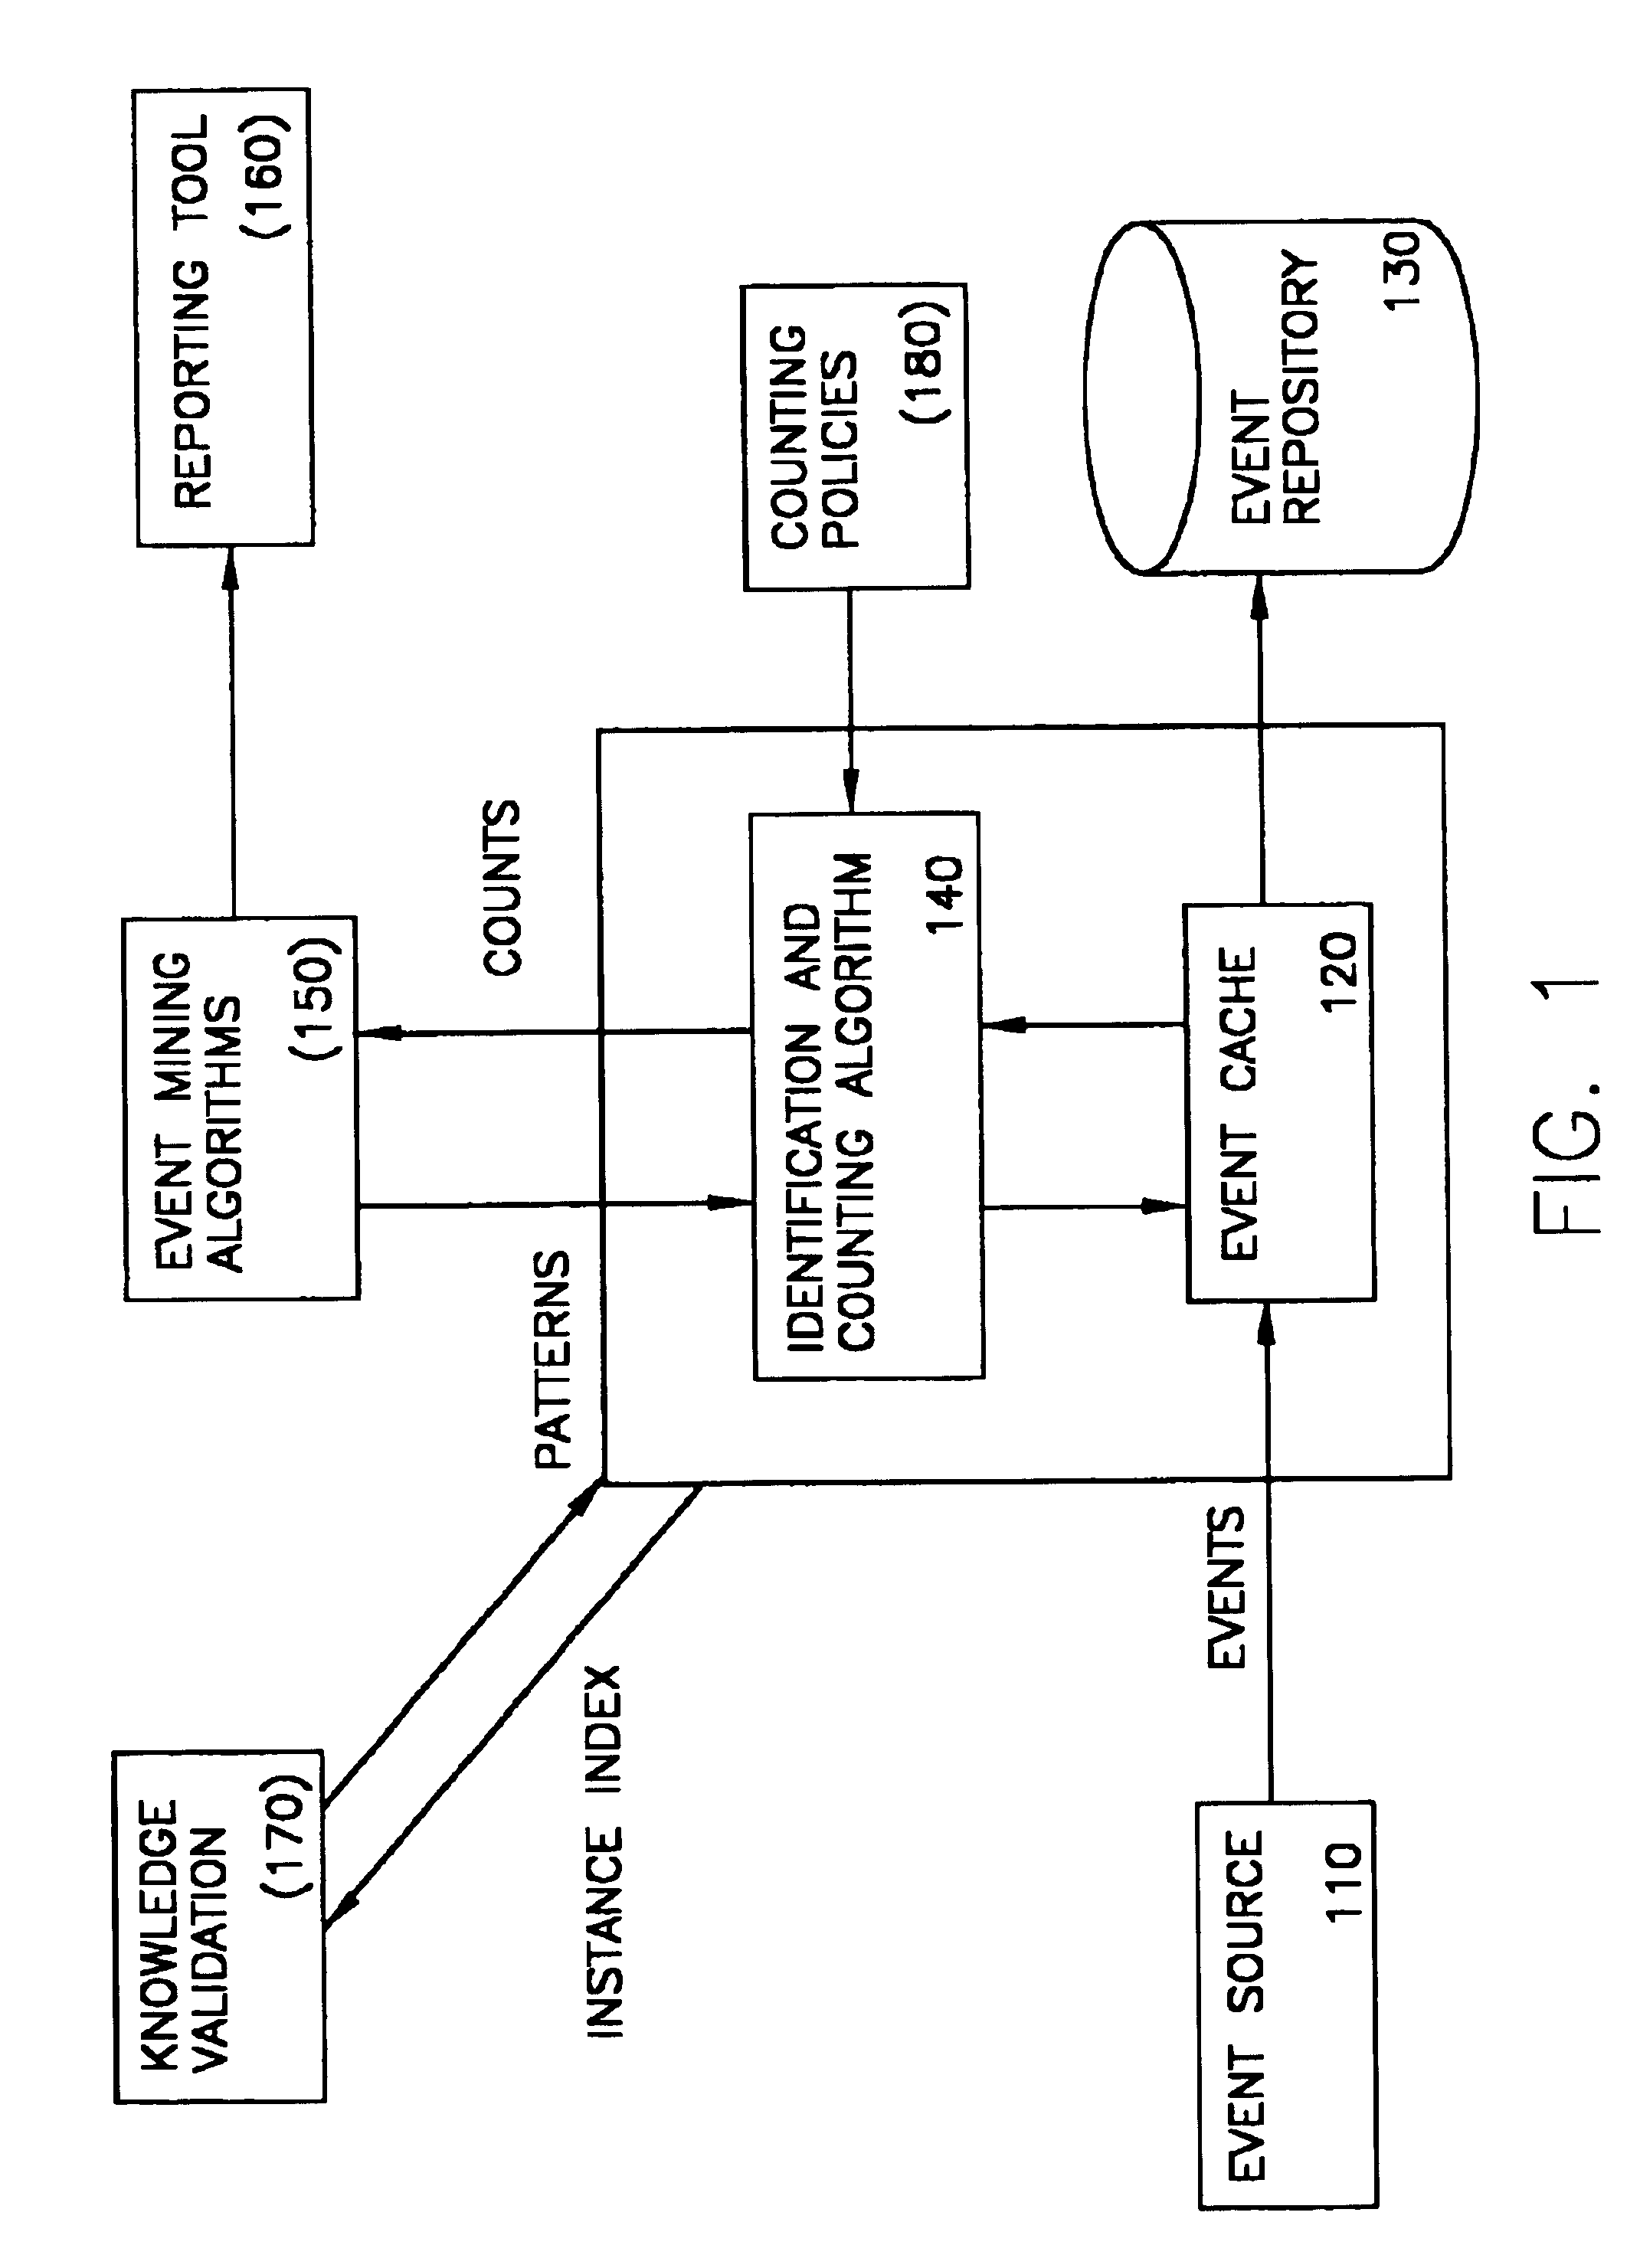 Systems and methods for identifying and counting instances of temporal patterns